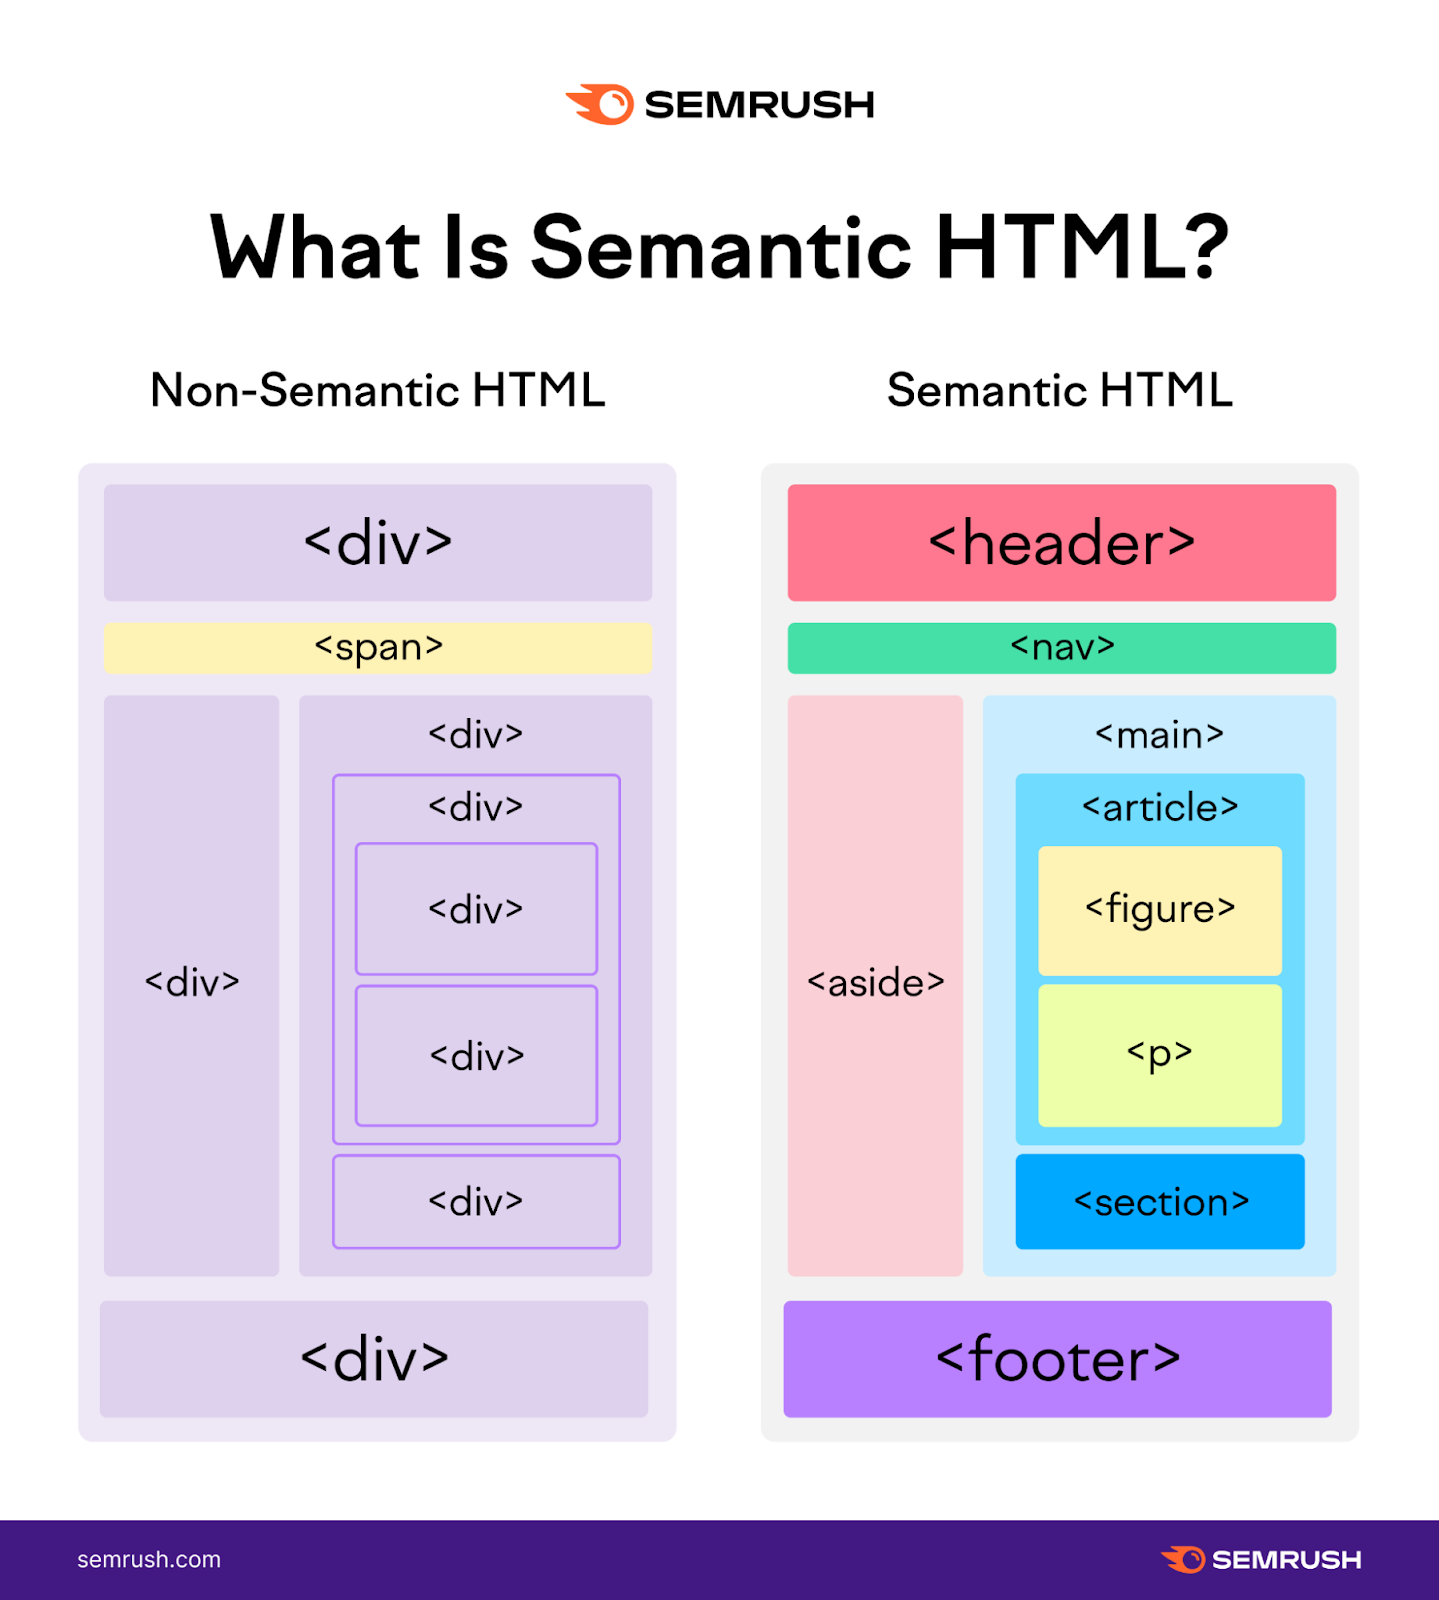 An illustration of what a semantic HTML is